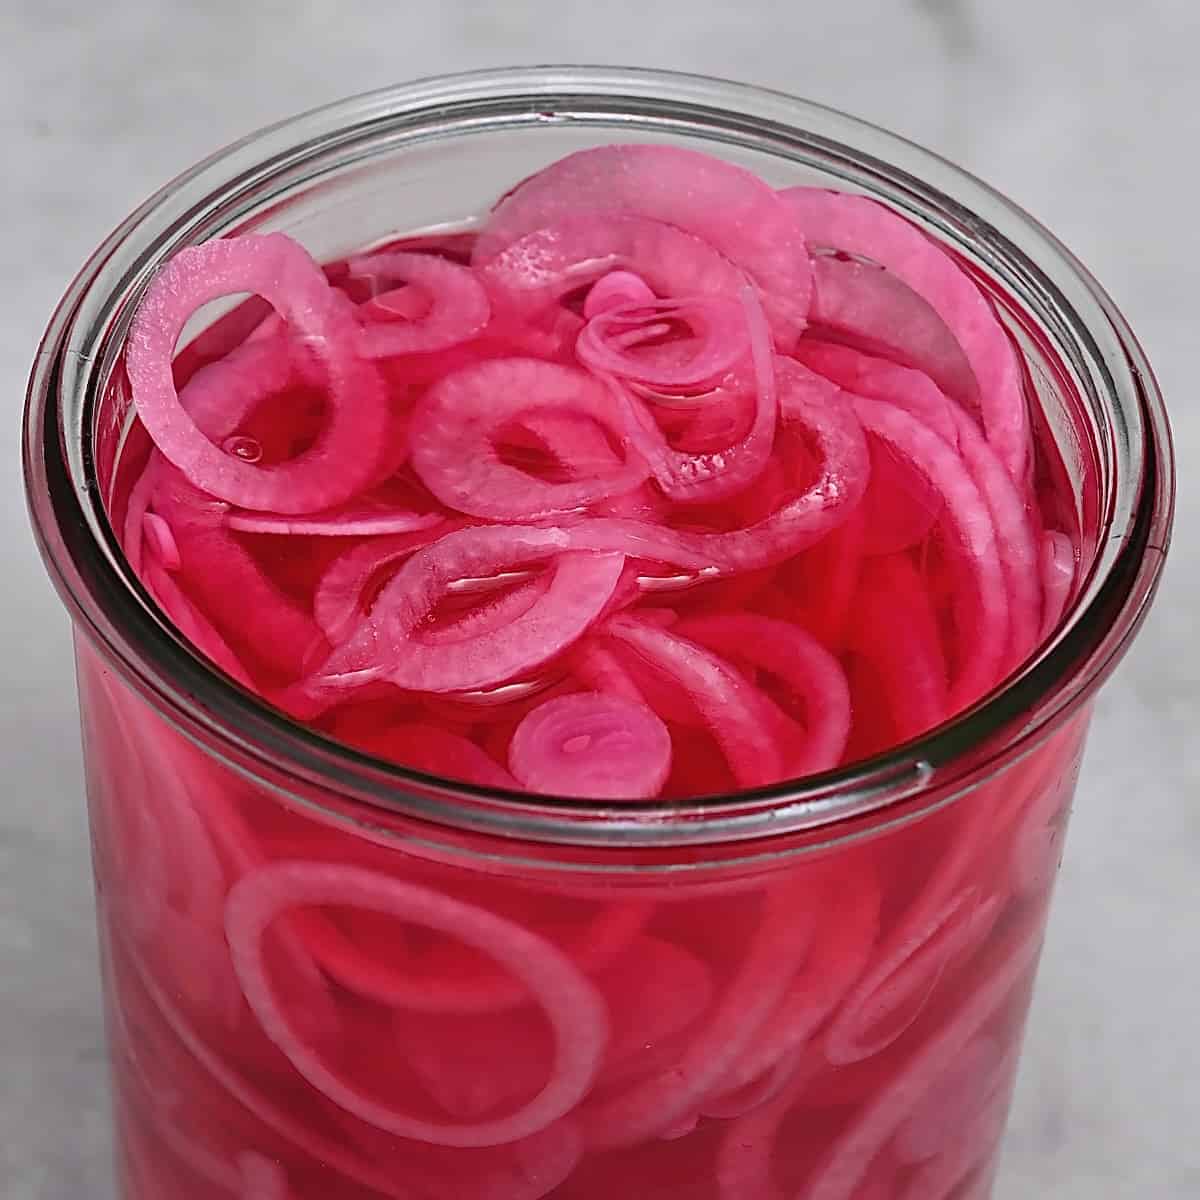 A jar with Homemade pickled red onions